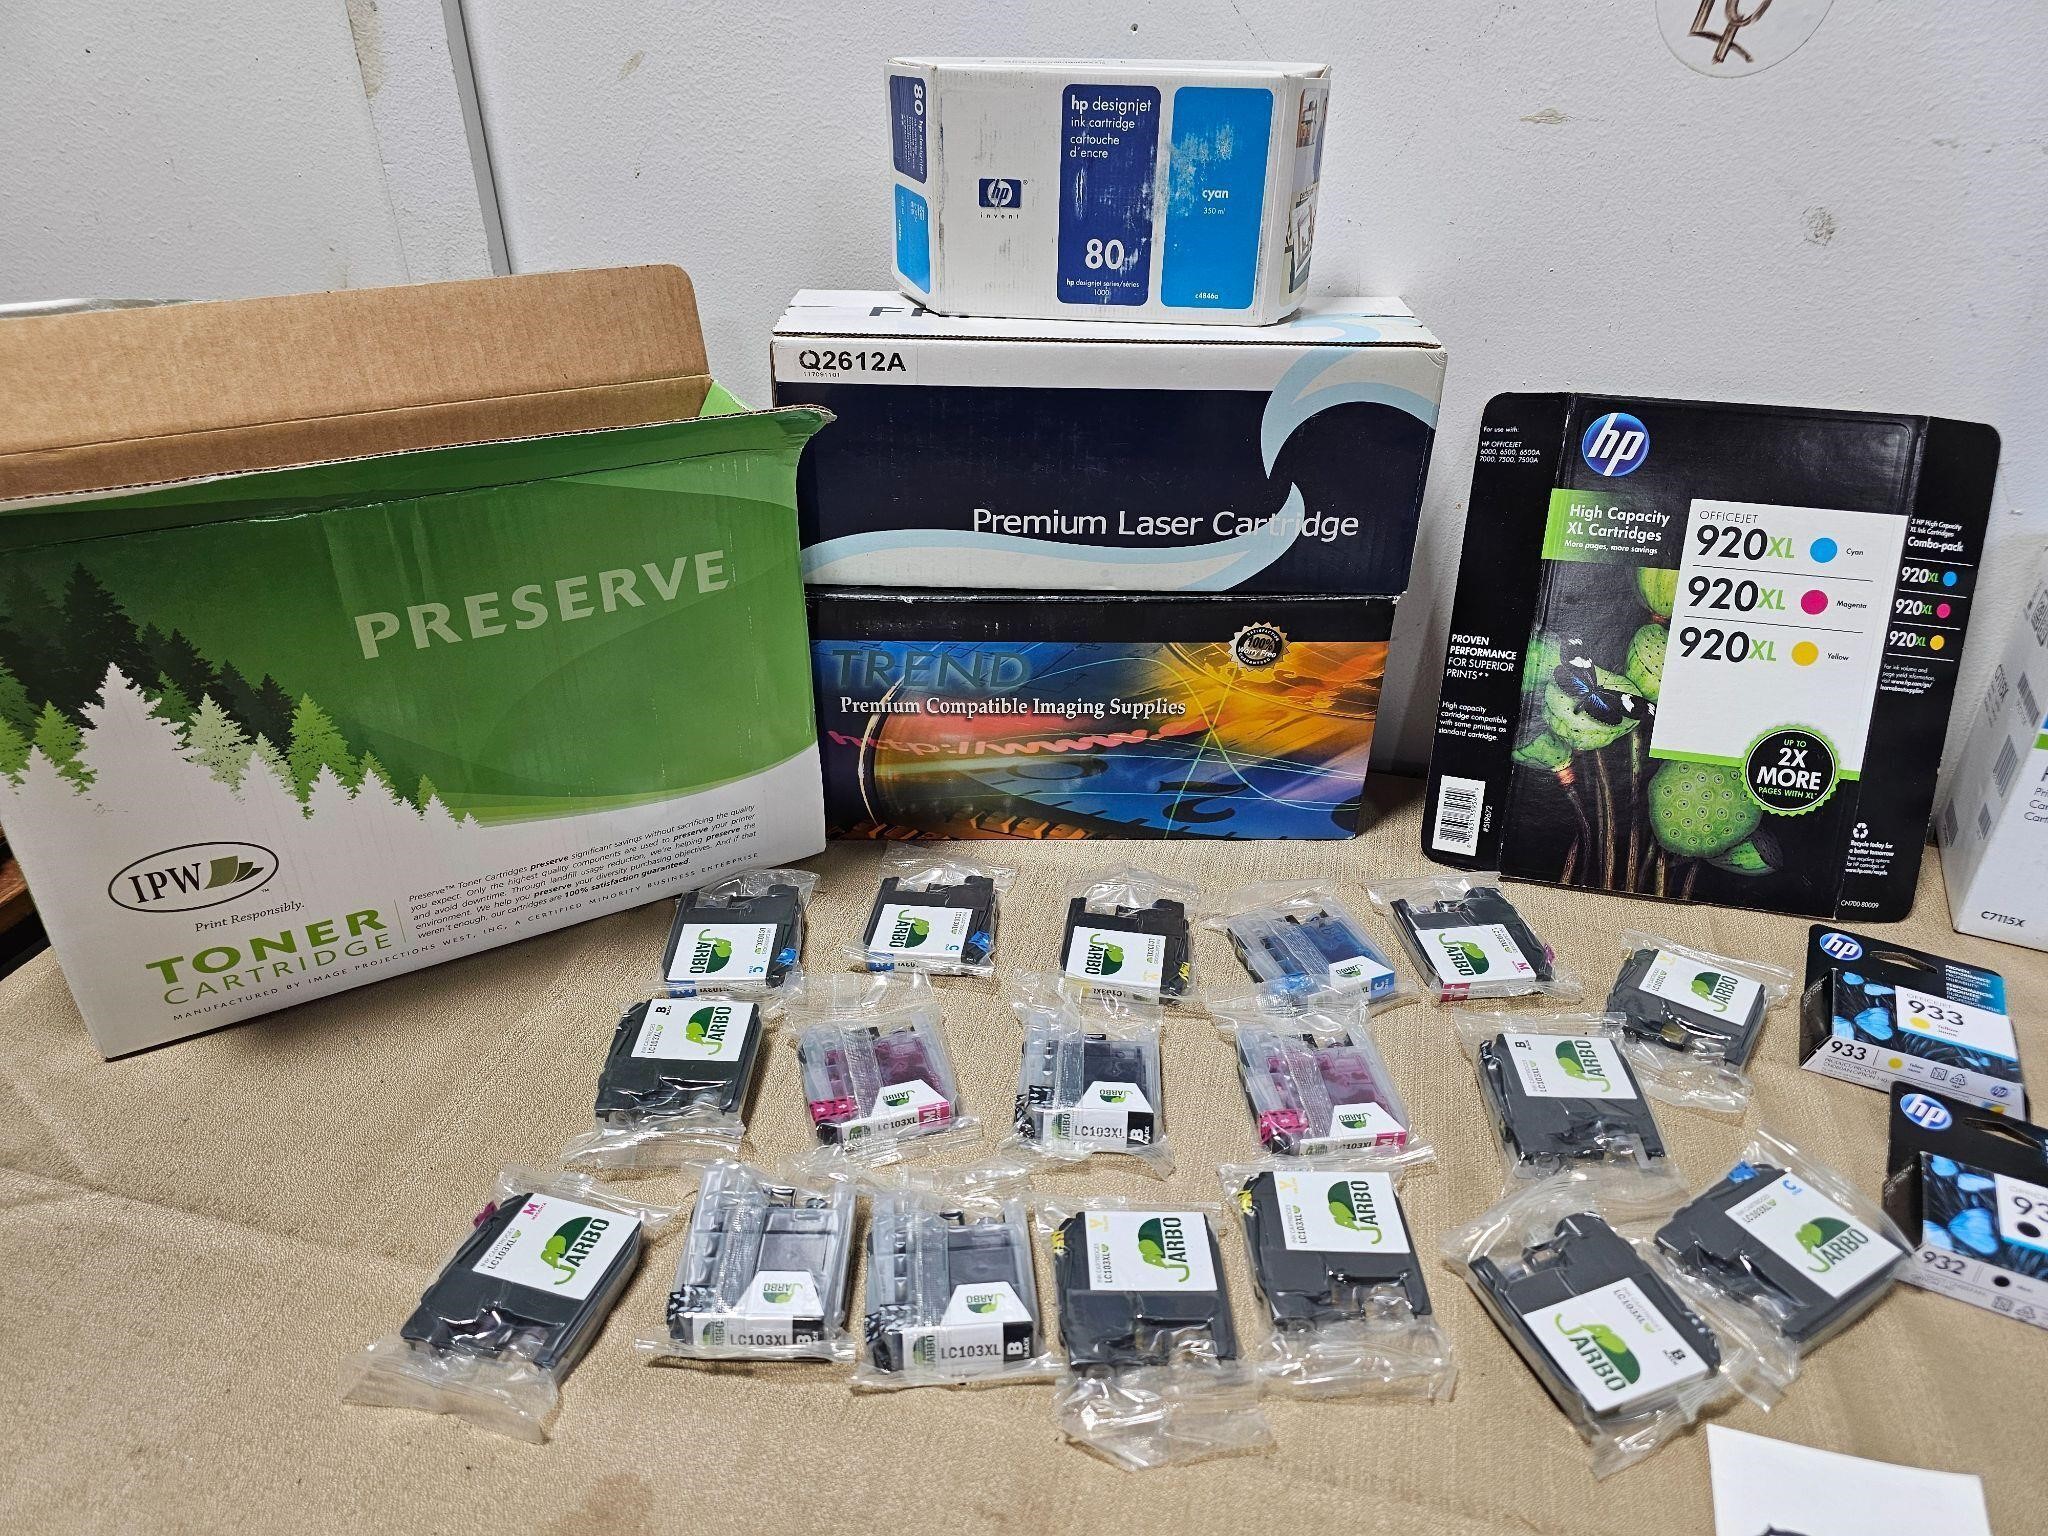 Thursday July 18th @ 6:00 PM Personal Property Auction